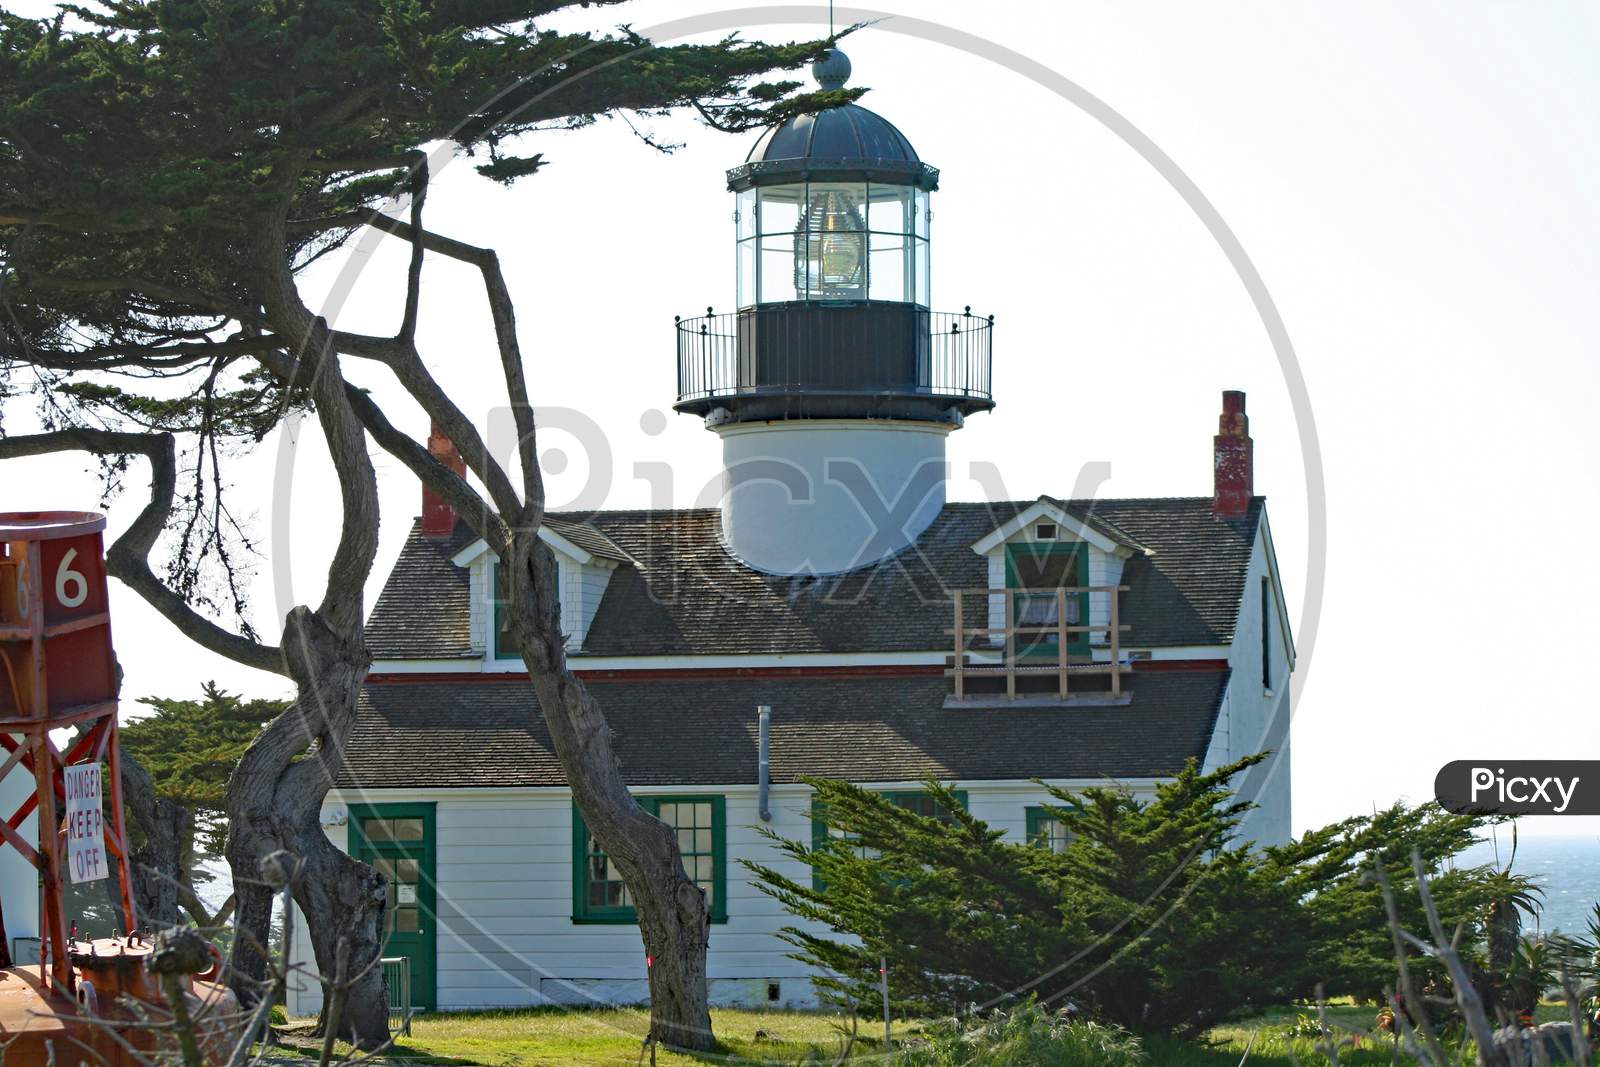 Point Pinos Lighthouse (Ca 00318)